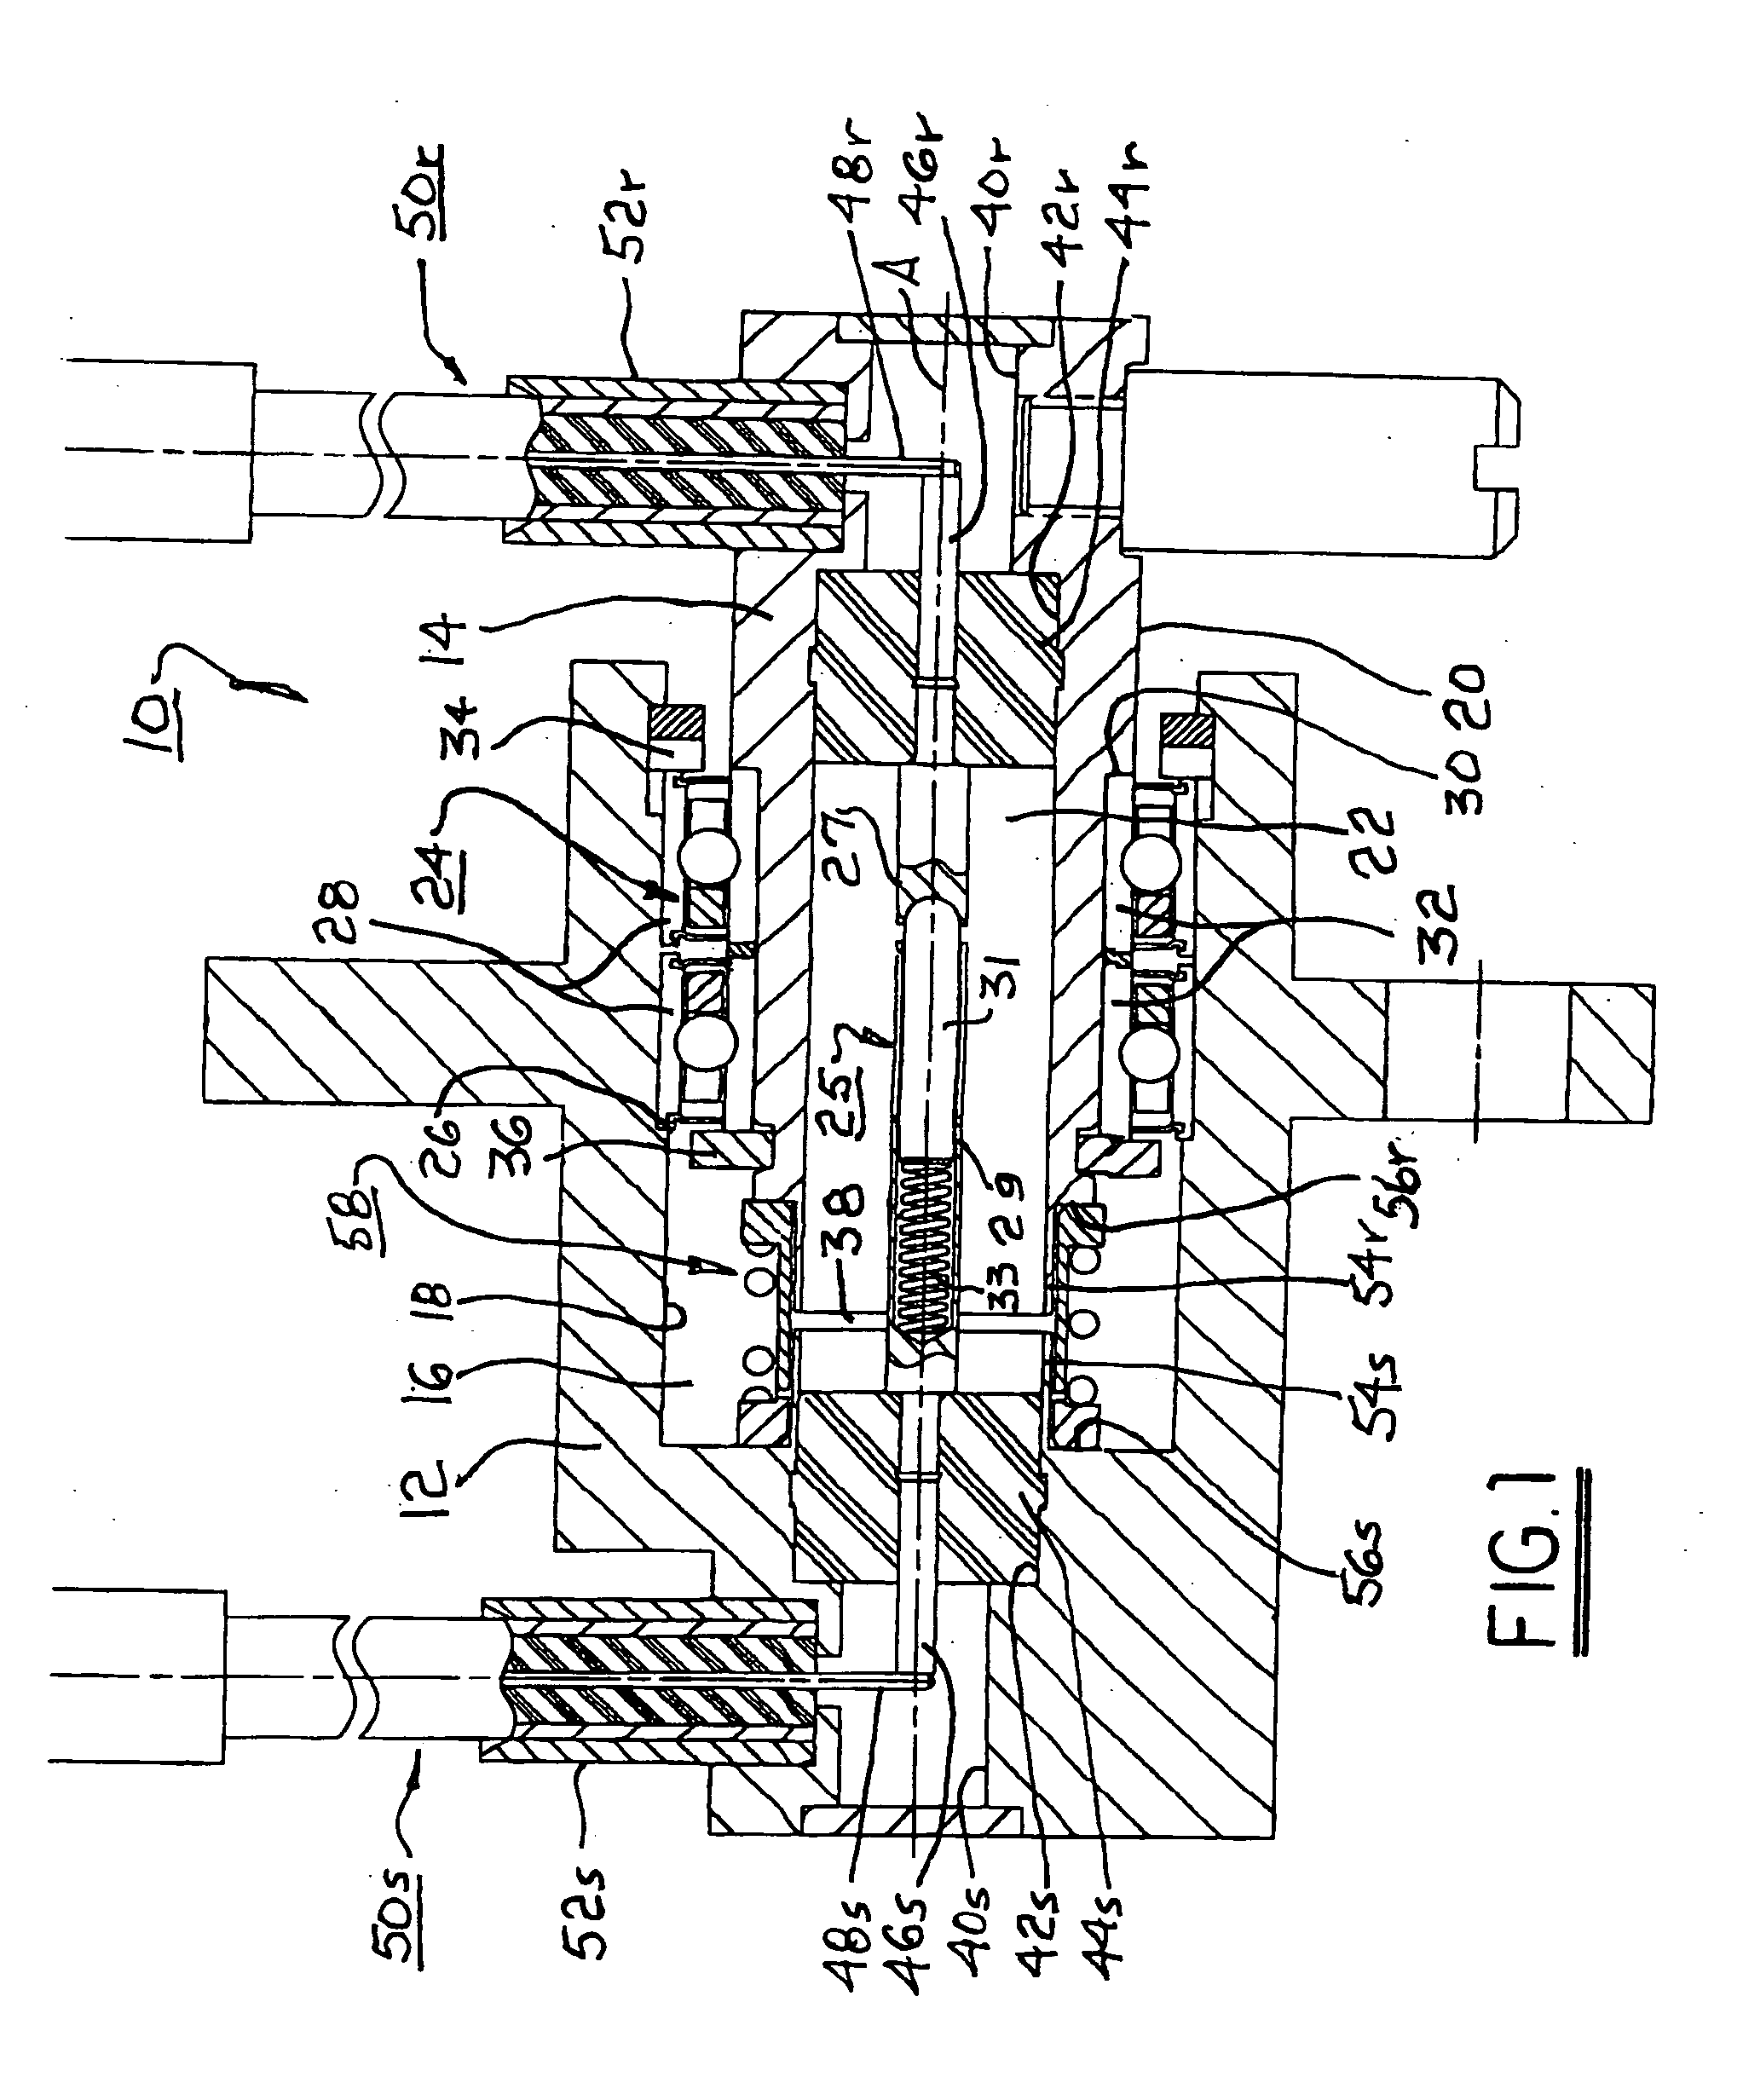 Integrated rotary connector and dynamic RF shield